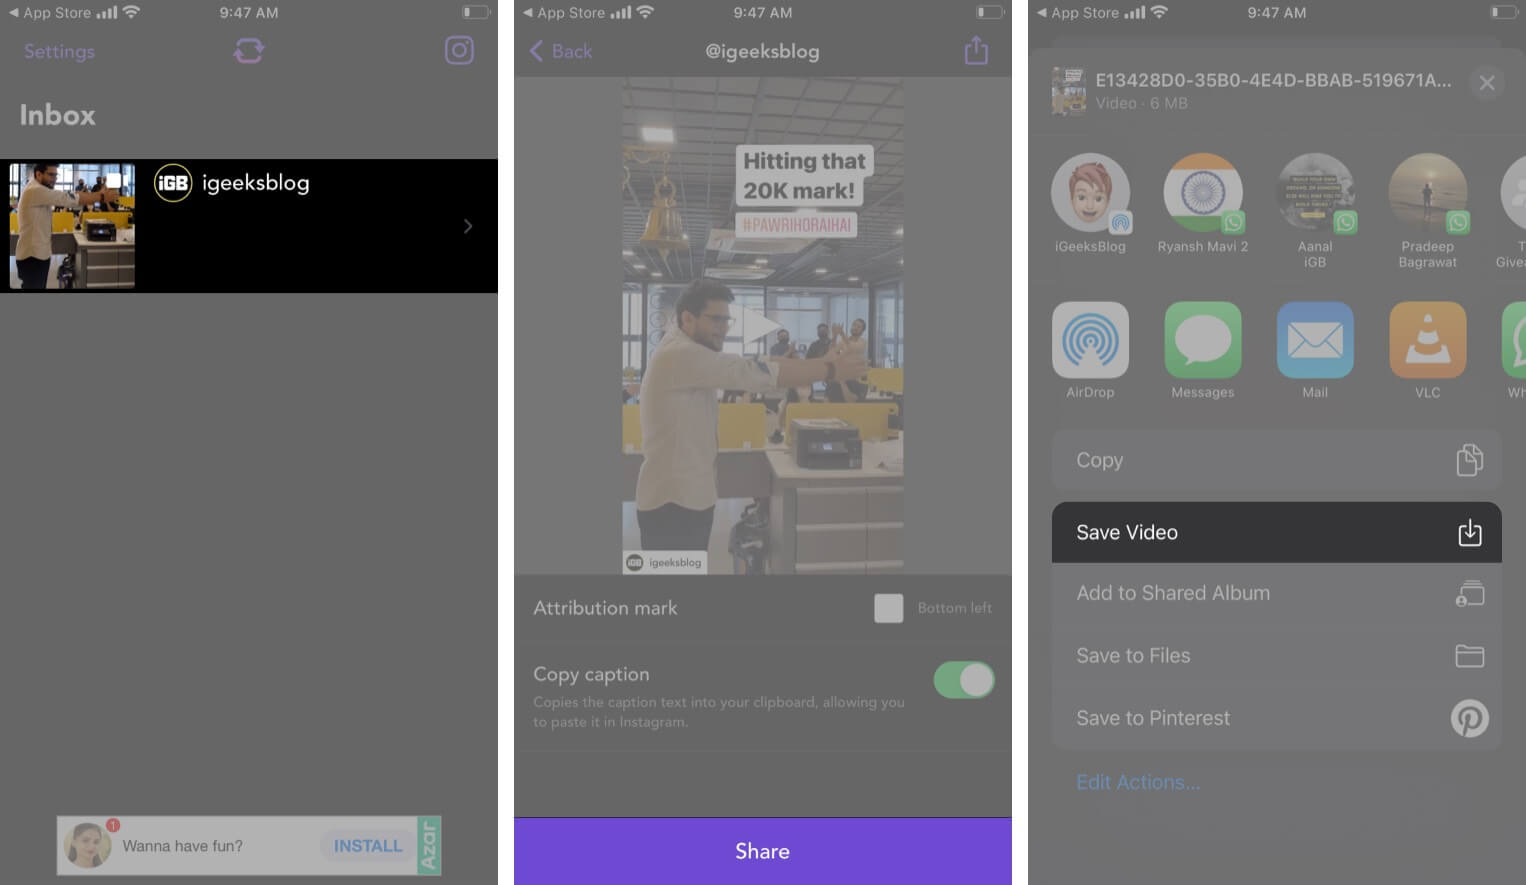 Select Share icon and tap Save Video in Repost app on iPhone